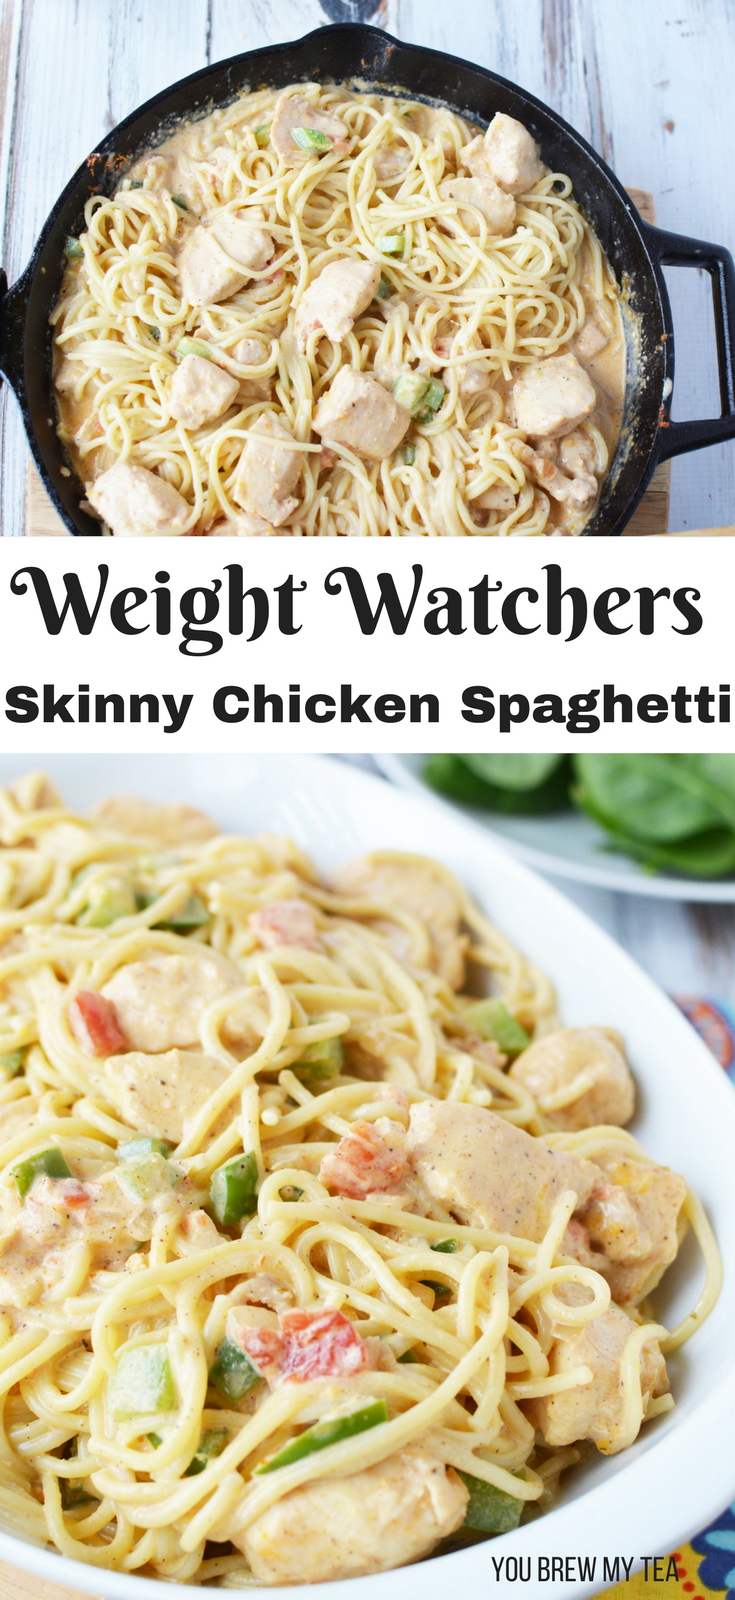 Our delicious and easy Skinny Chicken Spaghetti Recipe is a Weight Watchers FreeStyle dinner recipe you'll love to make! This easy chicken dinner is ready in under 30 minutes! 